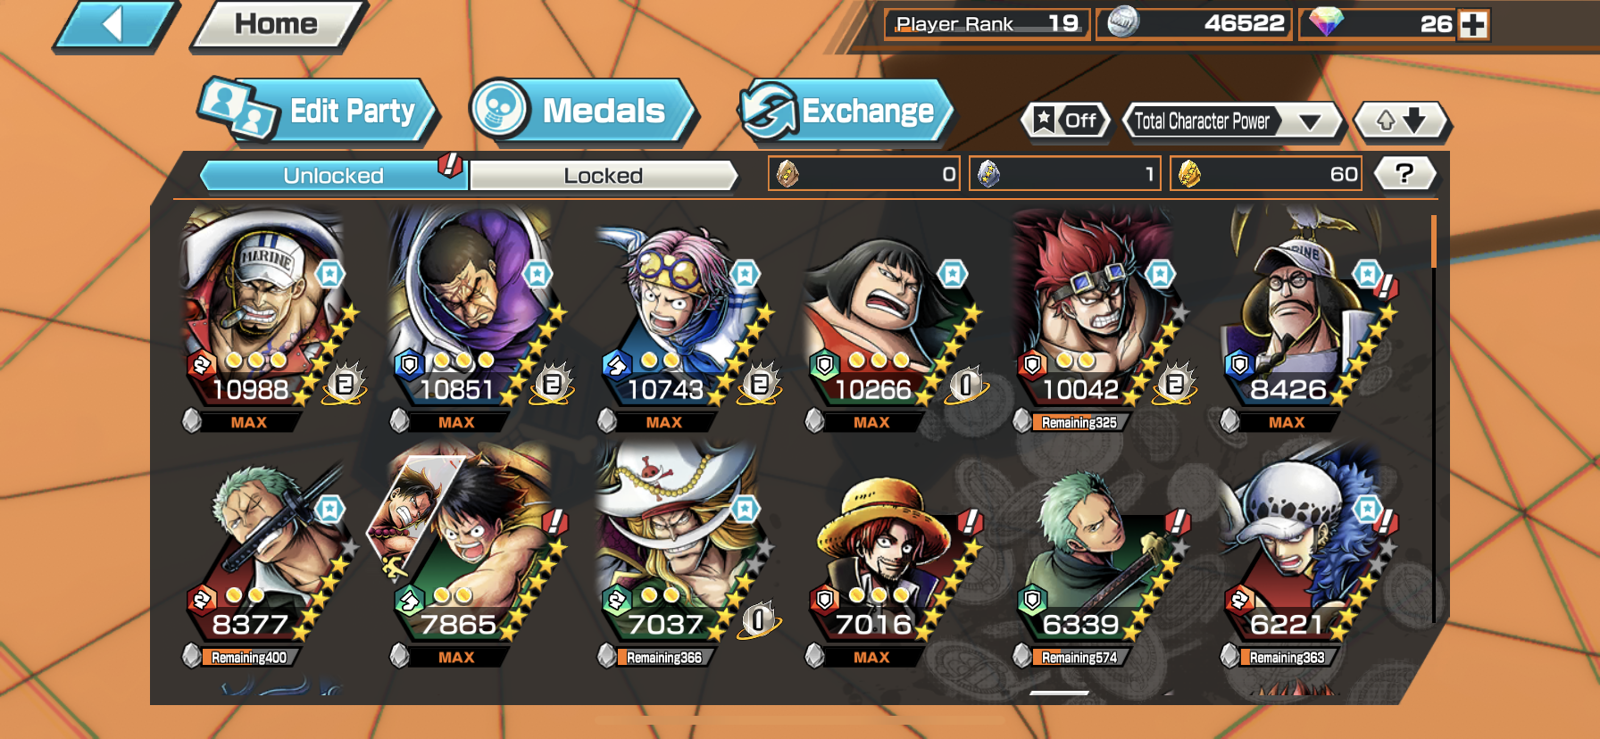 Very Rare* One Piece bounty rush account for sale MANY Characters - EpicNPC